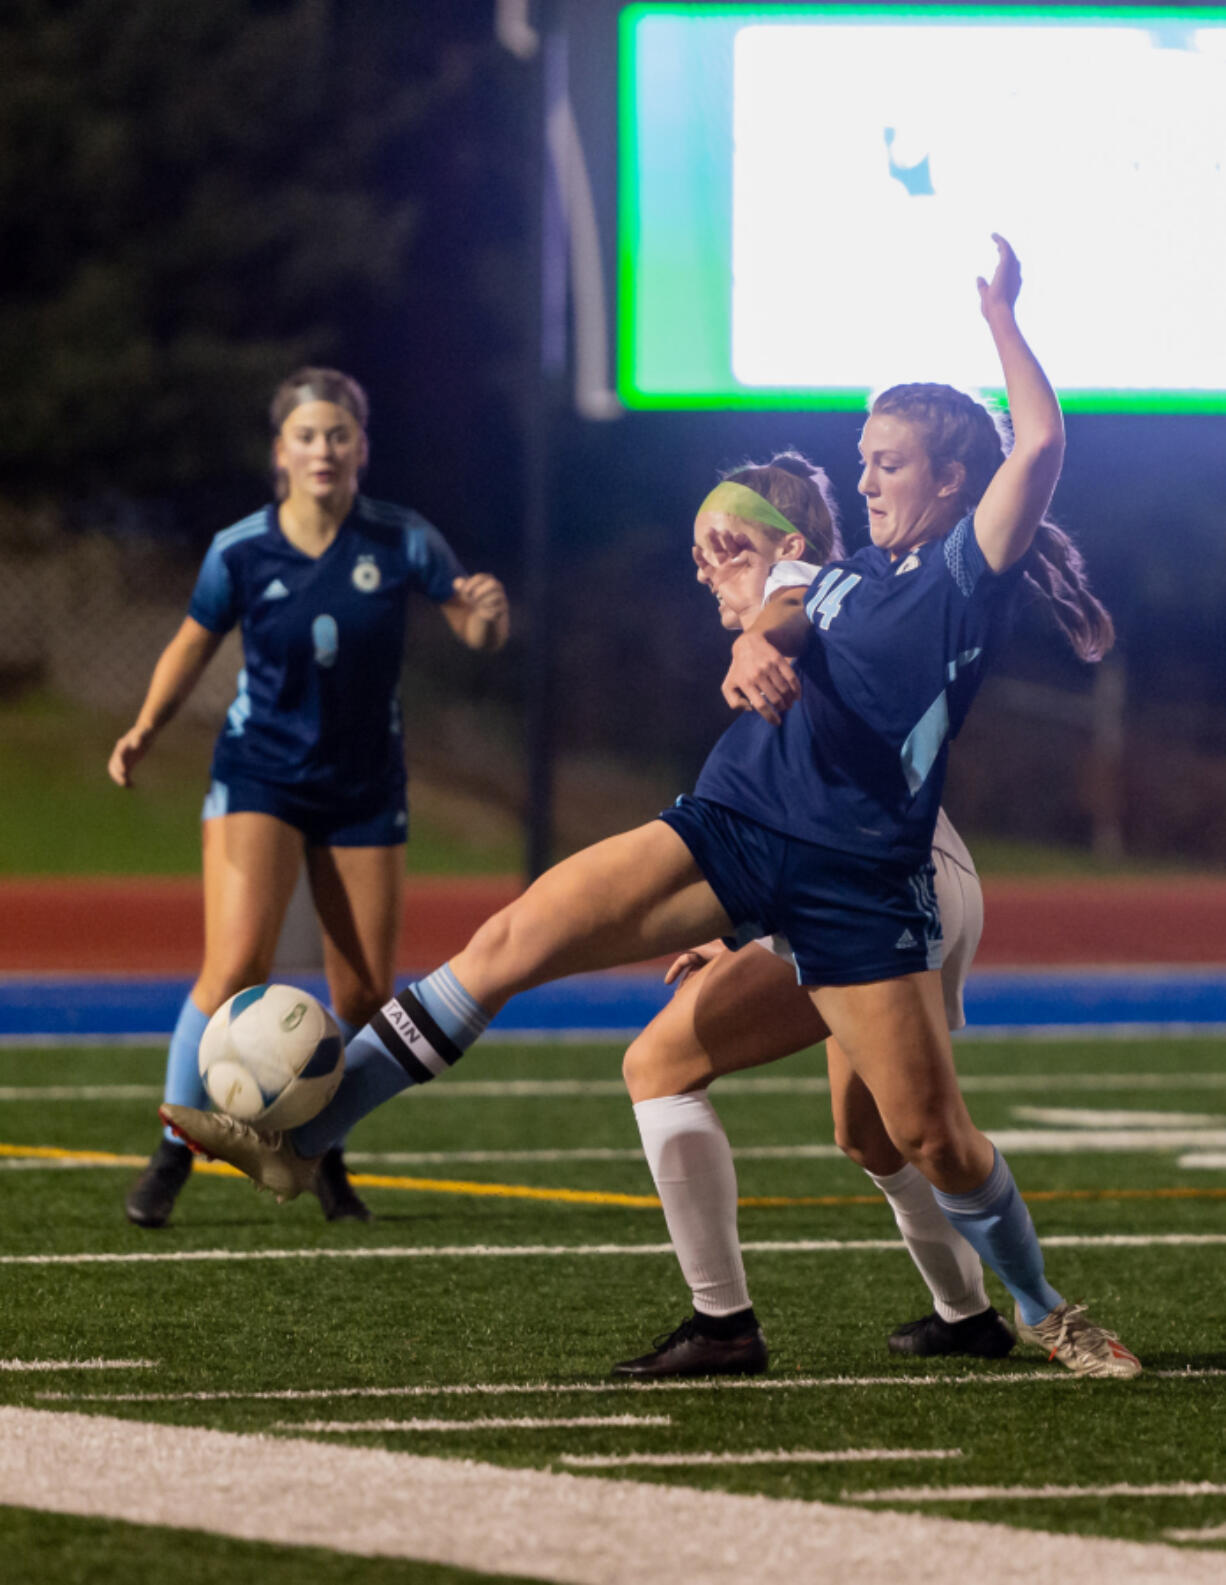 Ridgefield's Claire Jones and Hockinson's Molly Romanchock compete for the ball during the 2A state soccer semifinal on Friday at Shoreline Stadium. Hockinson won 1-0 and will play in the final on Saturday.